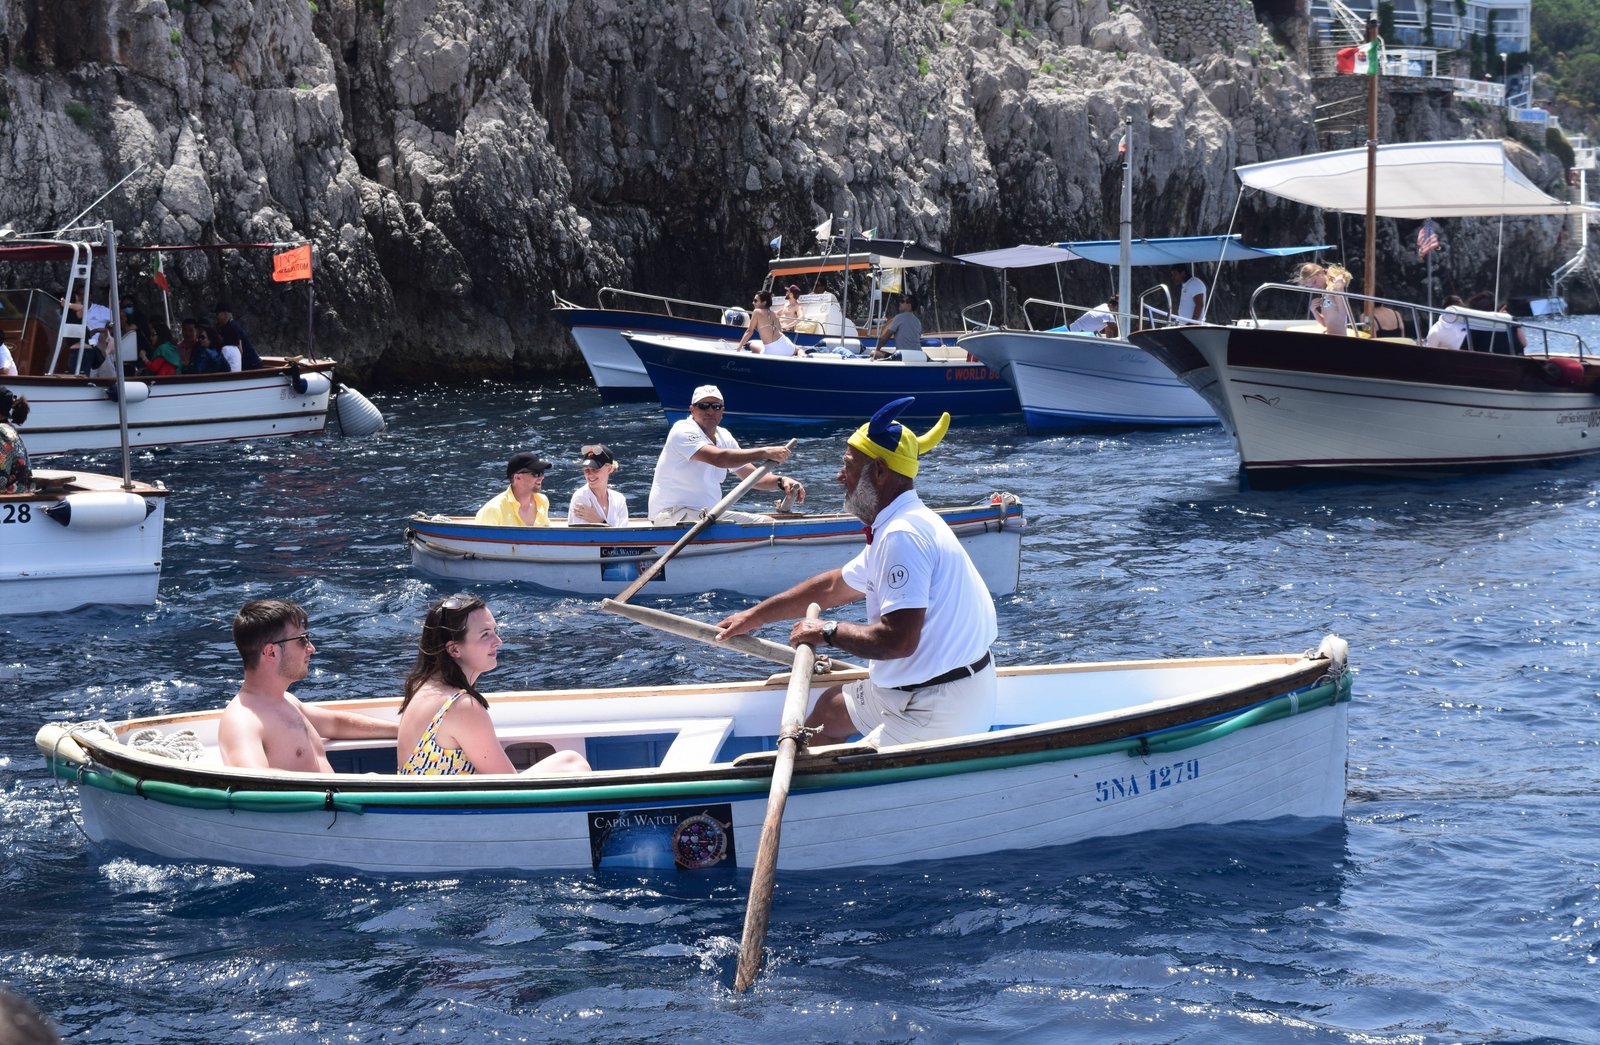 The Blue Grotto experience when on Capri in Italy, magical, beautiful, must do, ouritalianjourney.com, https://ouritalianjourney.com/experiencing-the-blue-grotto-is-it-worth-it